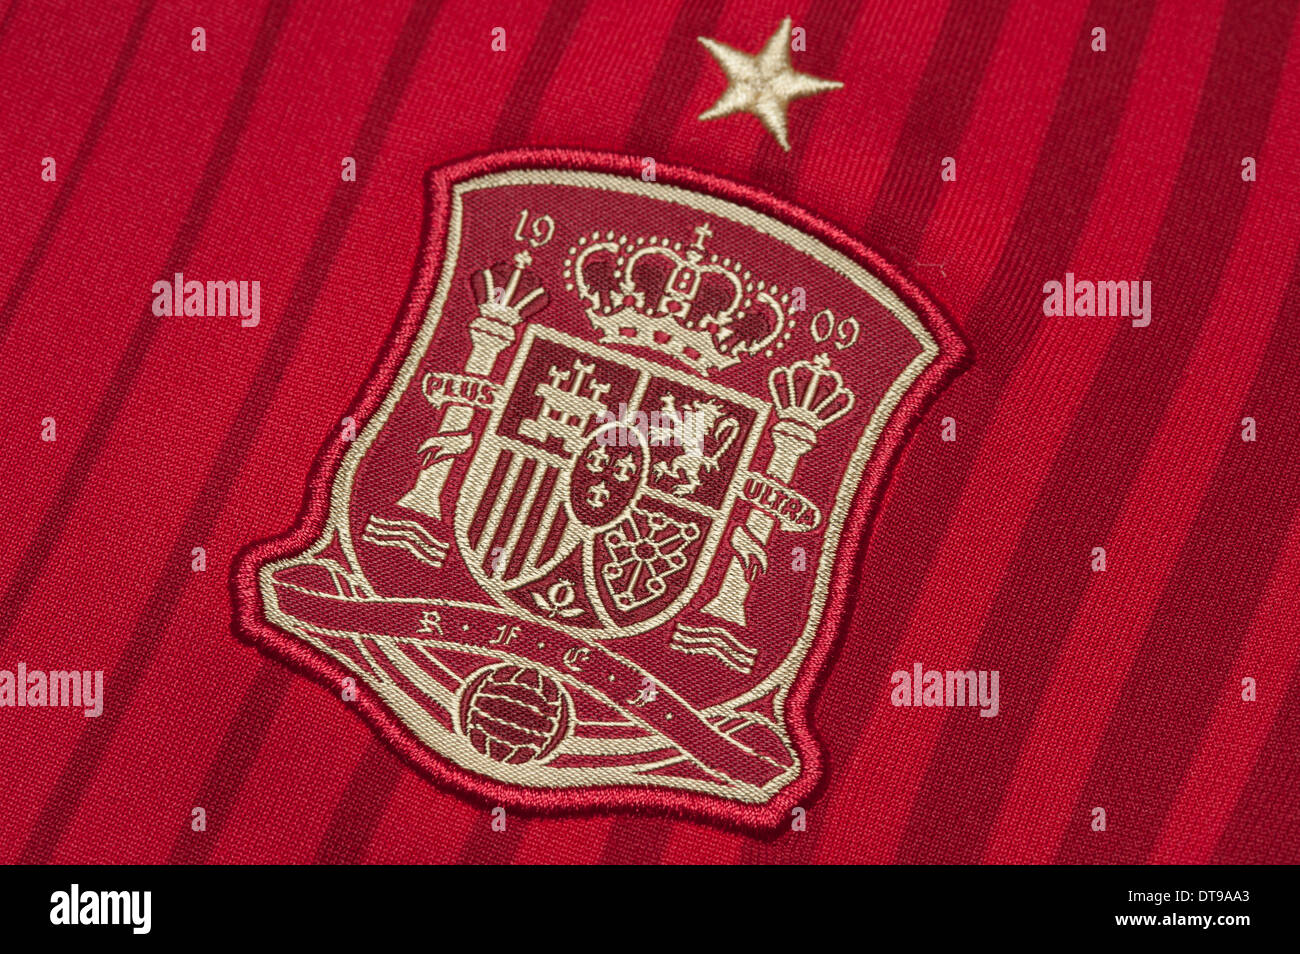 Close up of the Spanish National Football team kit Stock Photo